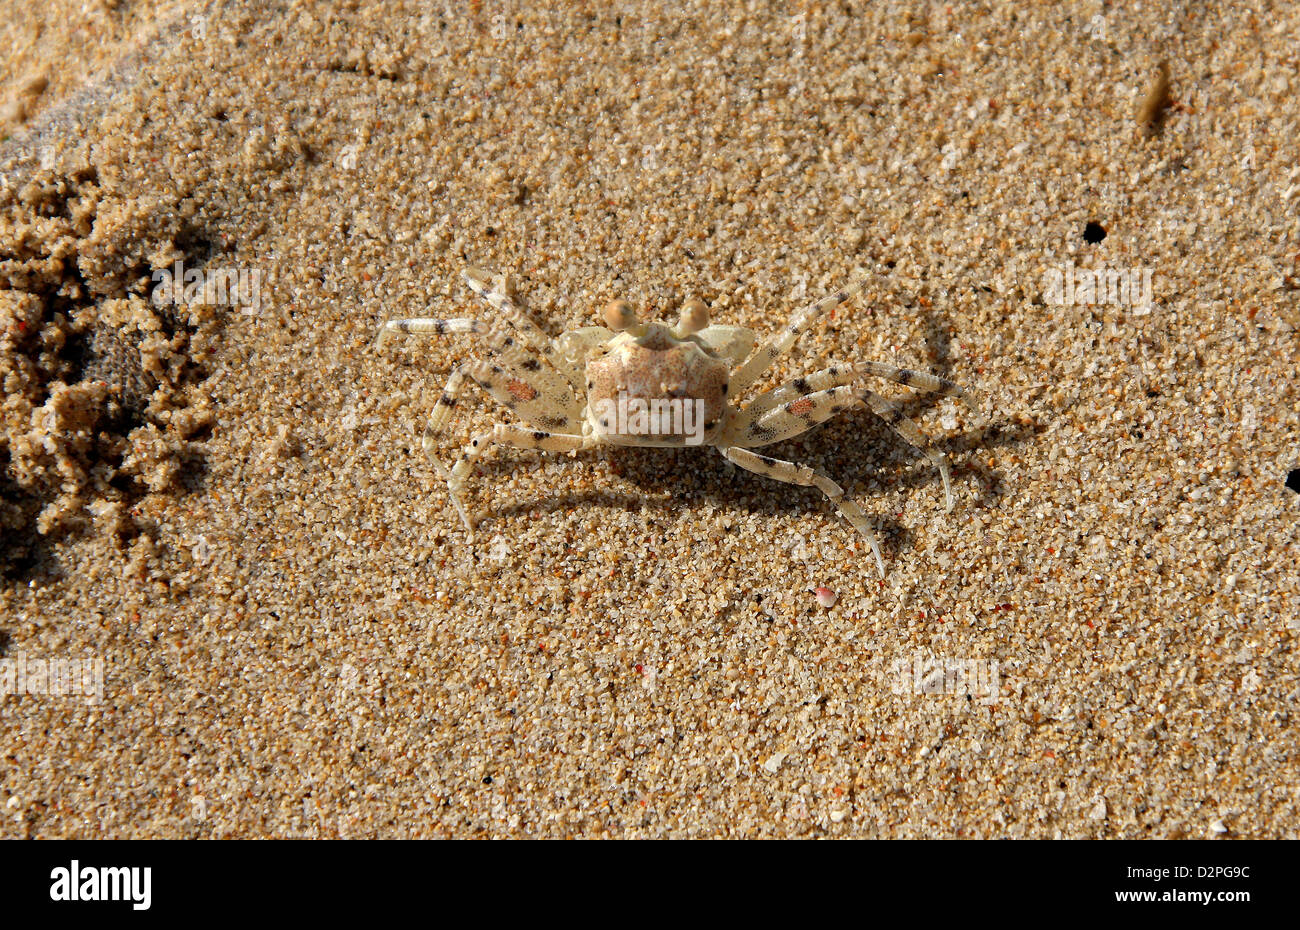 Young Pallid Ghost Crab that Uses the Sand for Camouflage, Ocypode pallidula, Ocypodidae, Decapoda, Crustaceae. Stock Photo